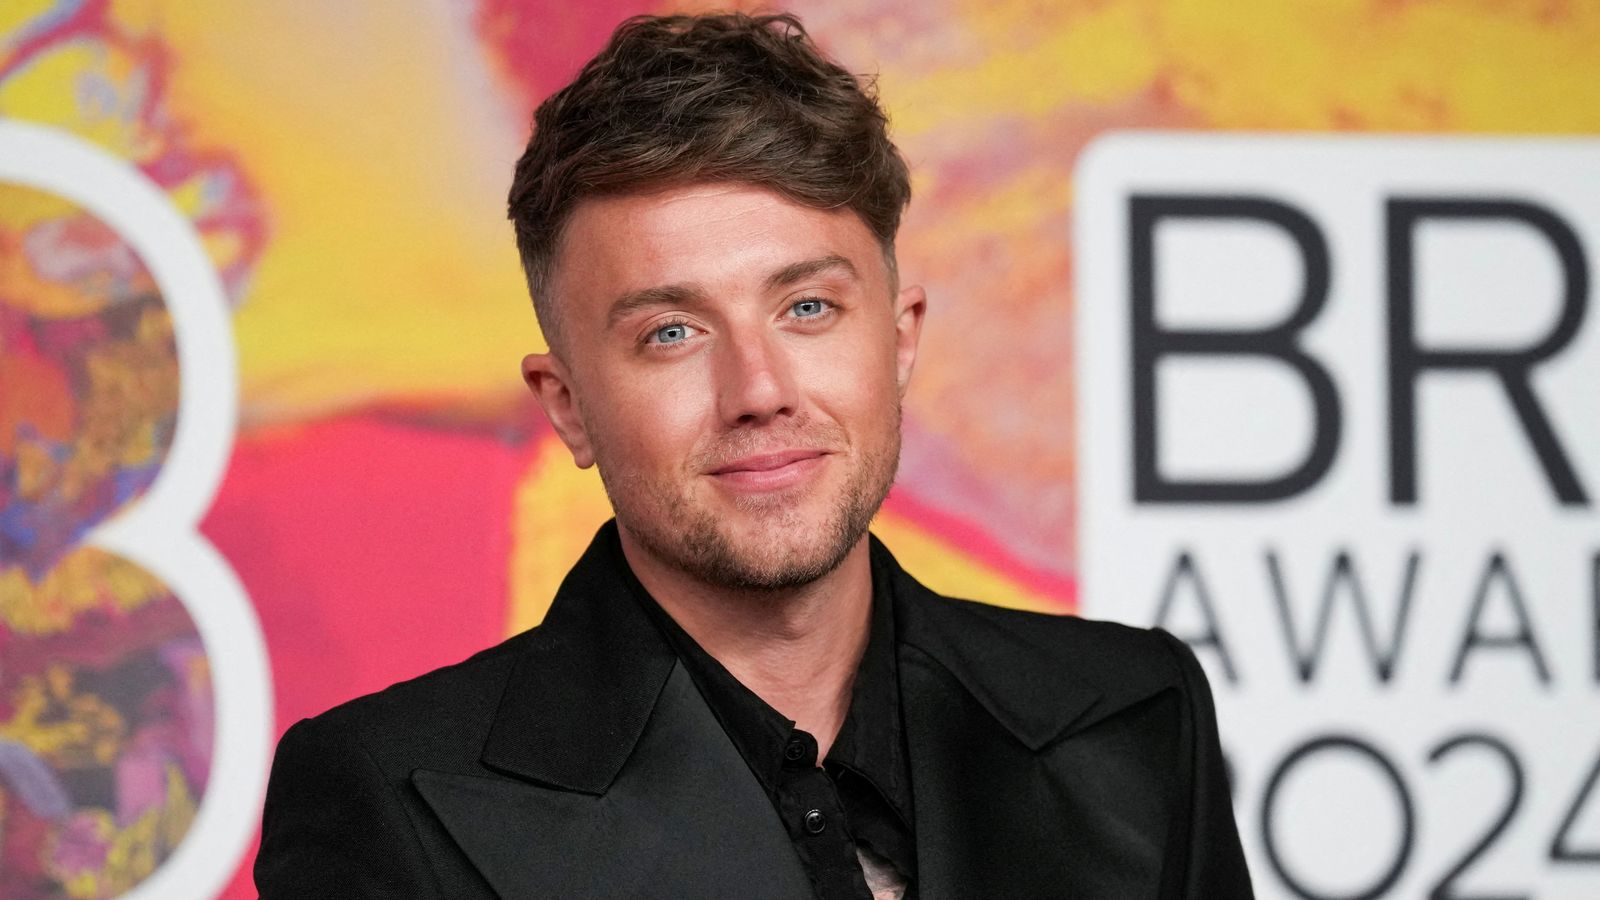 Roman Kemp shares antidepressants low sex drive switch to 'benefit other people'